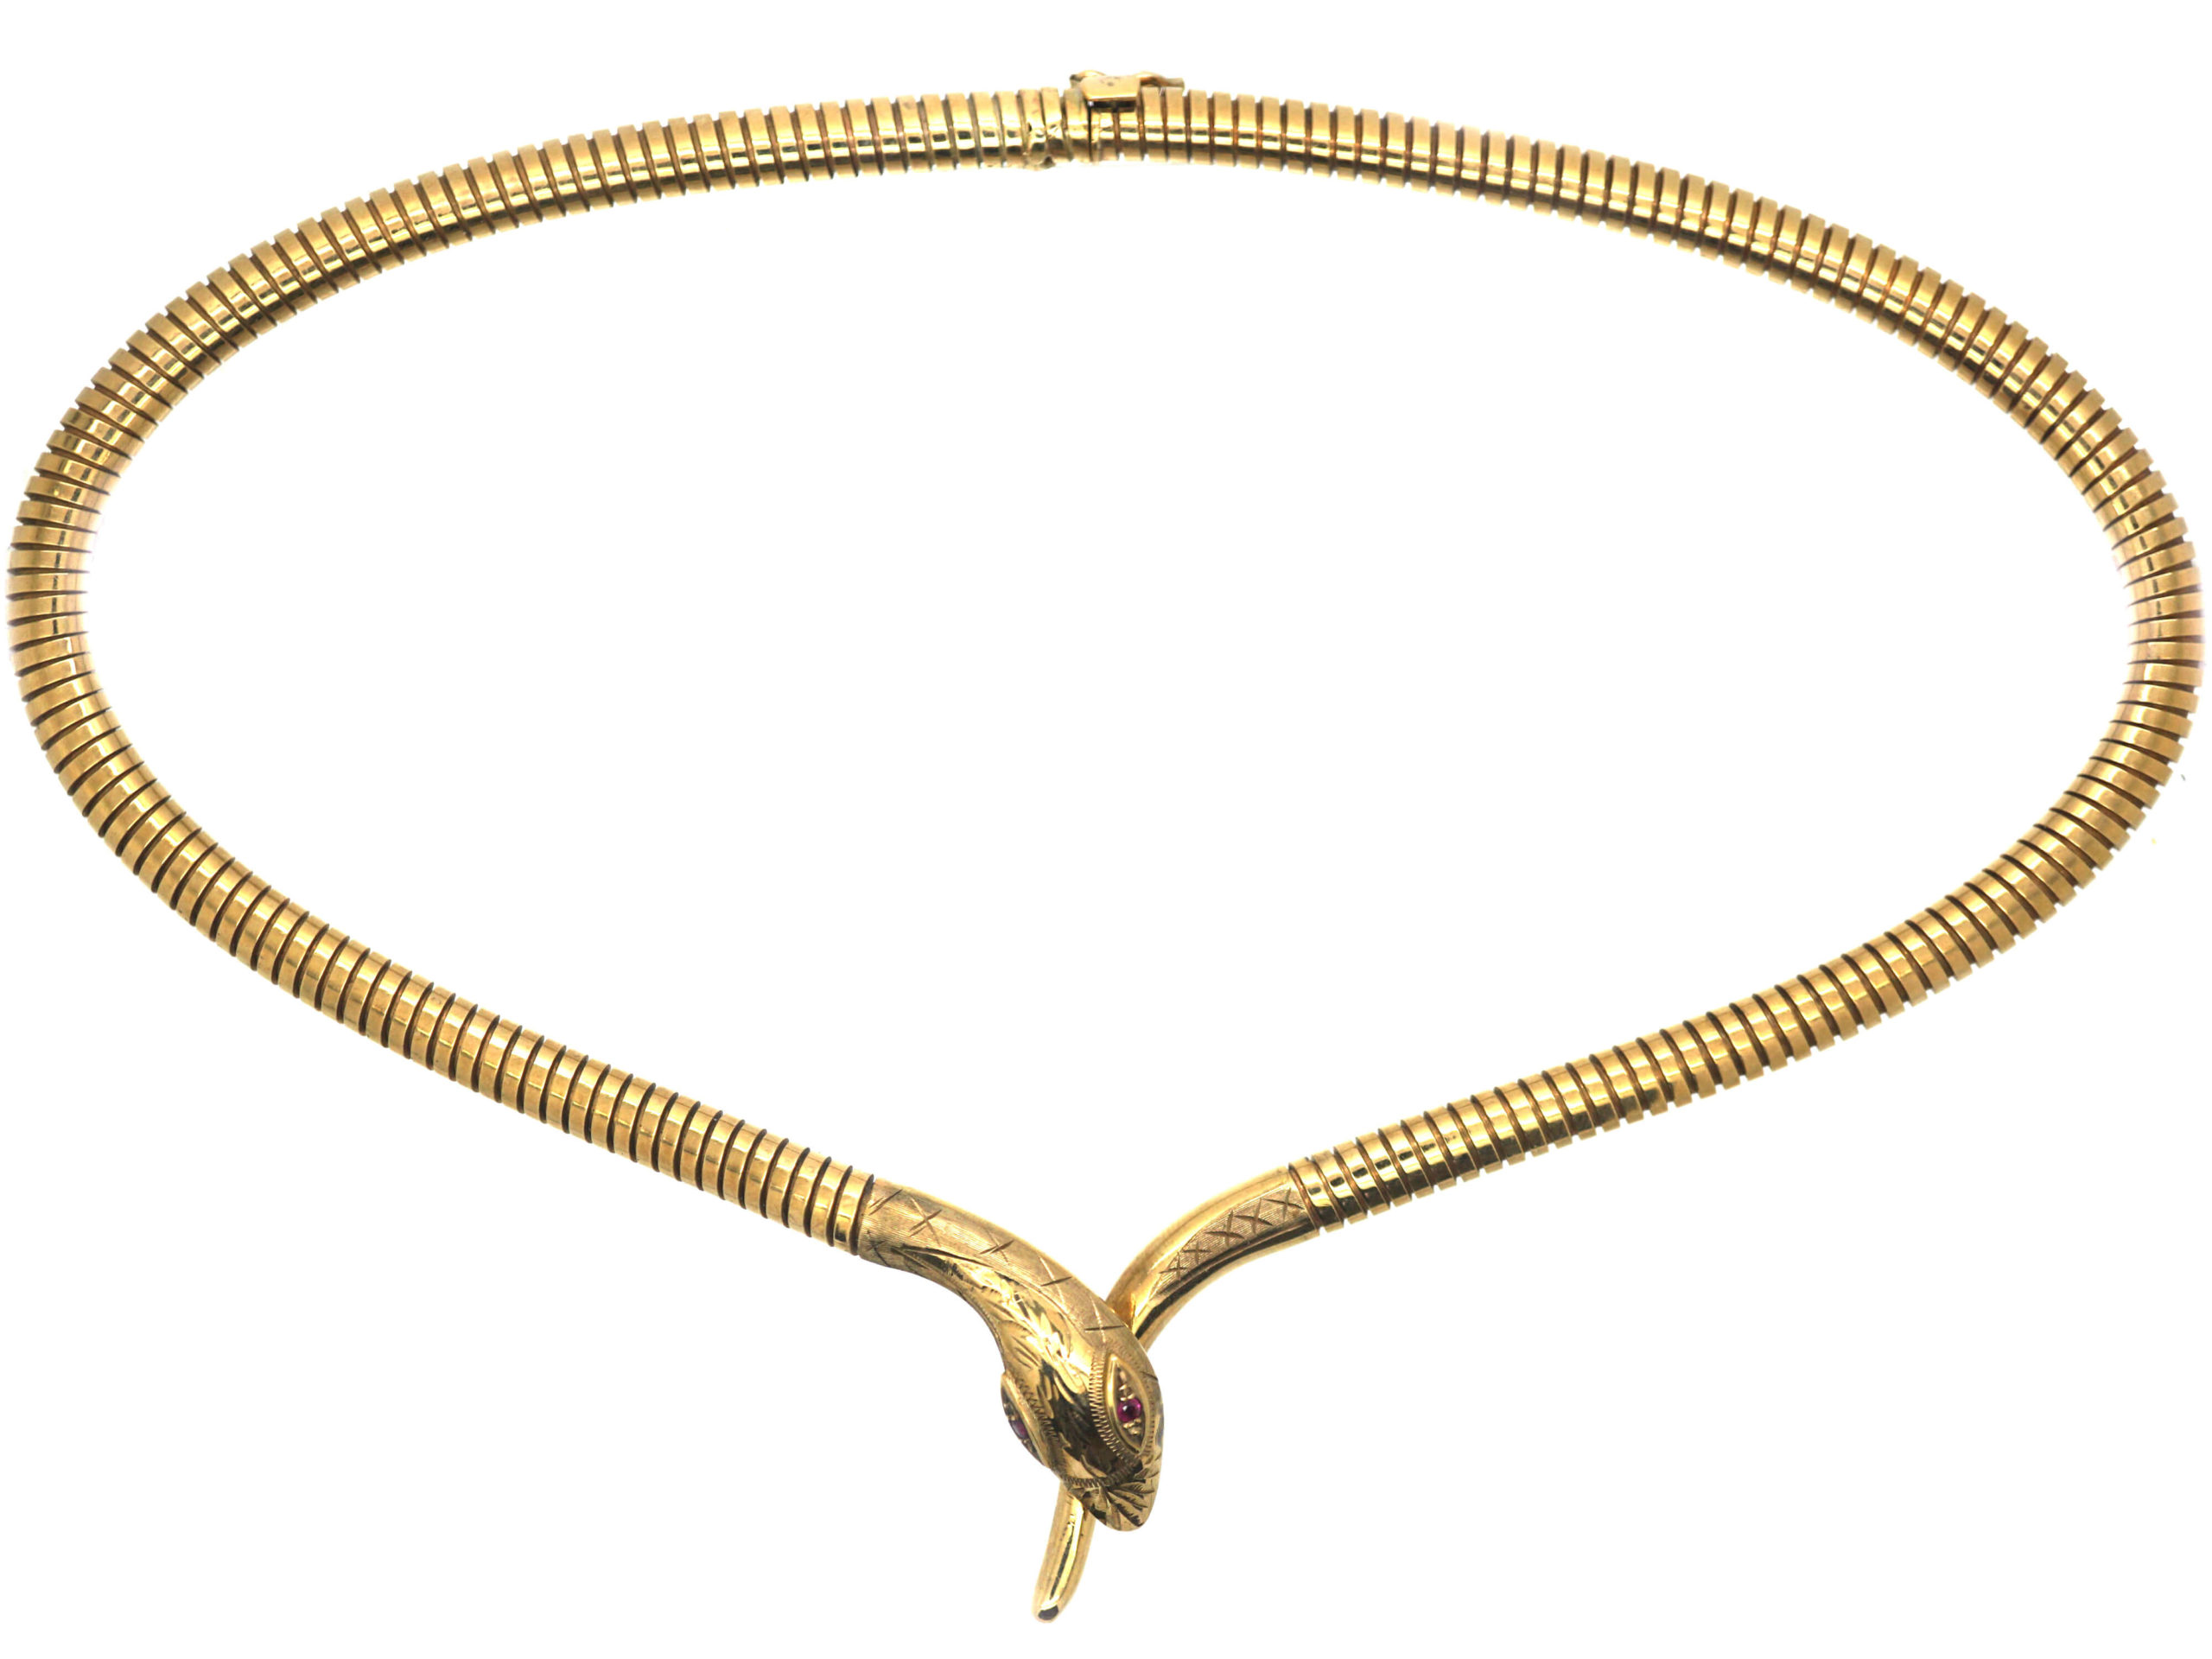 Italian Gold Men's 4.1mm Franco Snake Chain Necklace in Hollow 10K Gold -  26